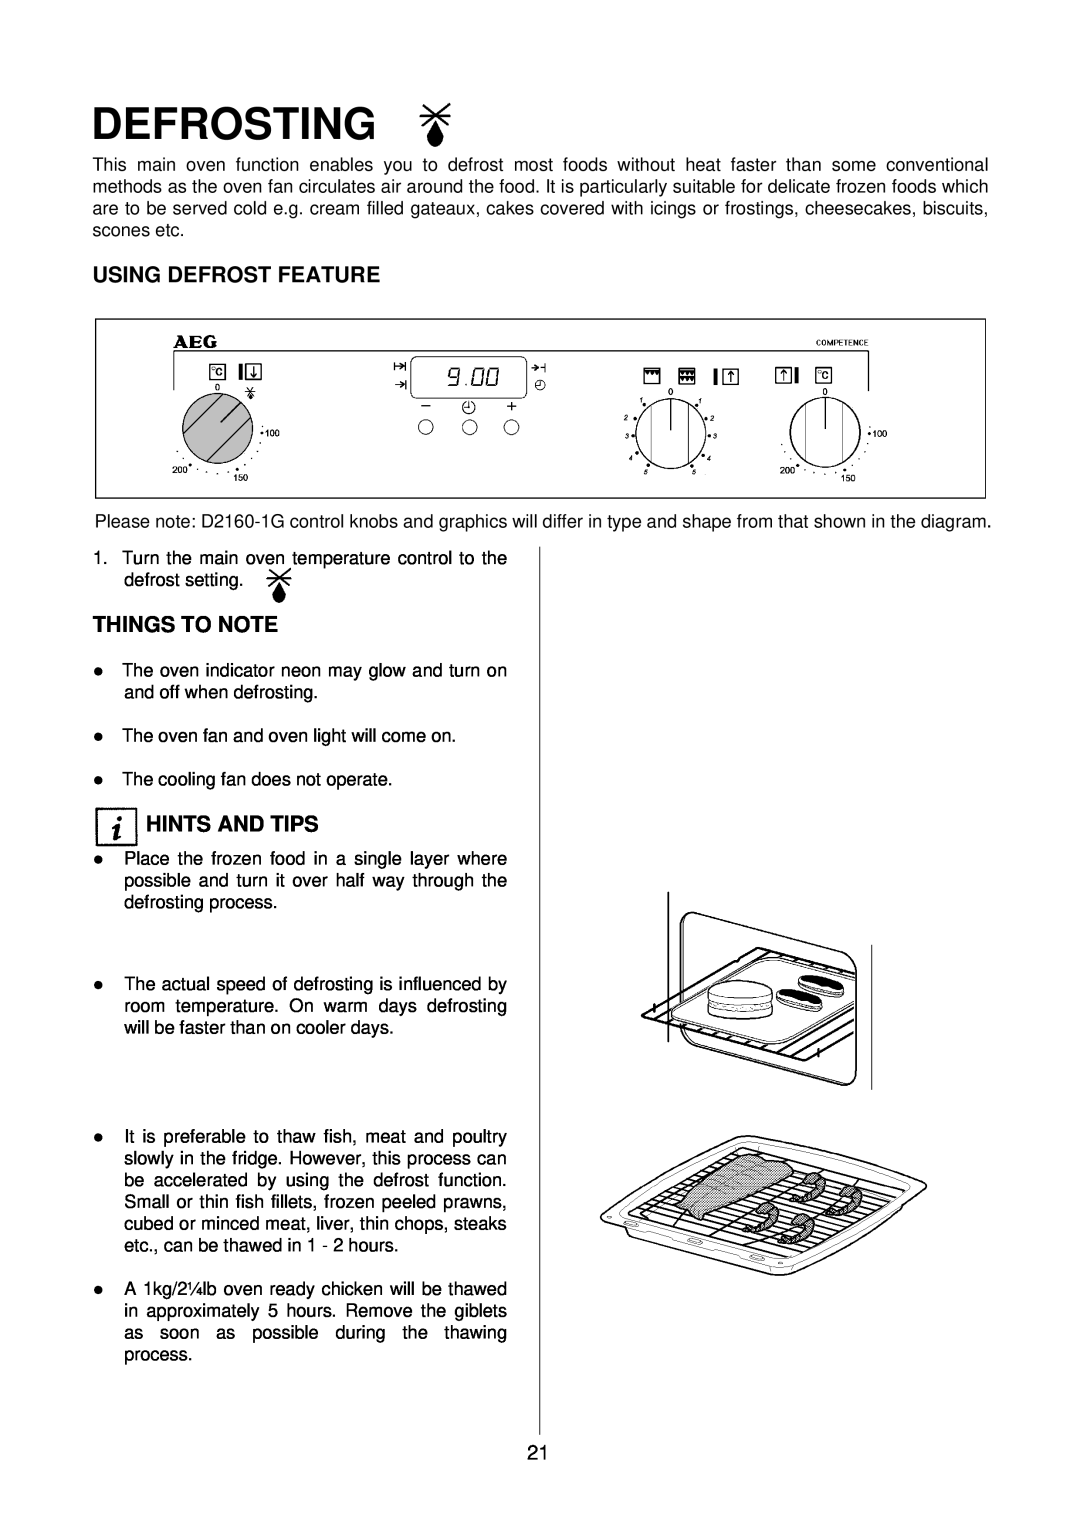 Electrolux D2160-1 operating instructions Defrosting, Using Defrost Feature, Things To Note, Hints And Tips 